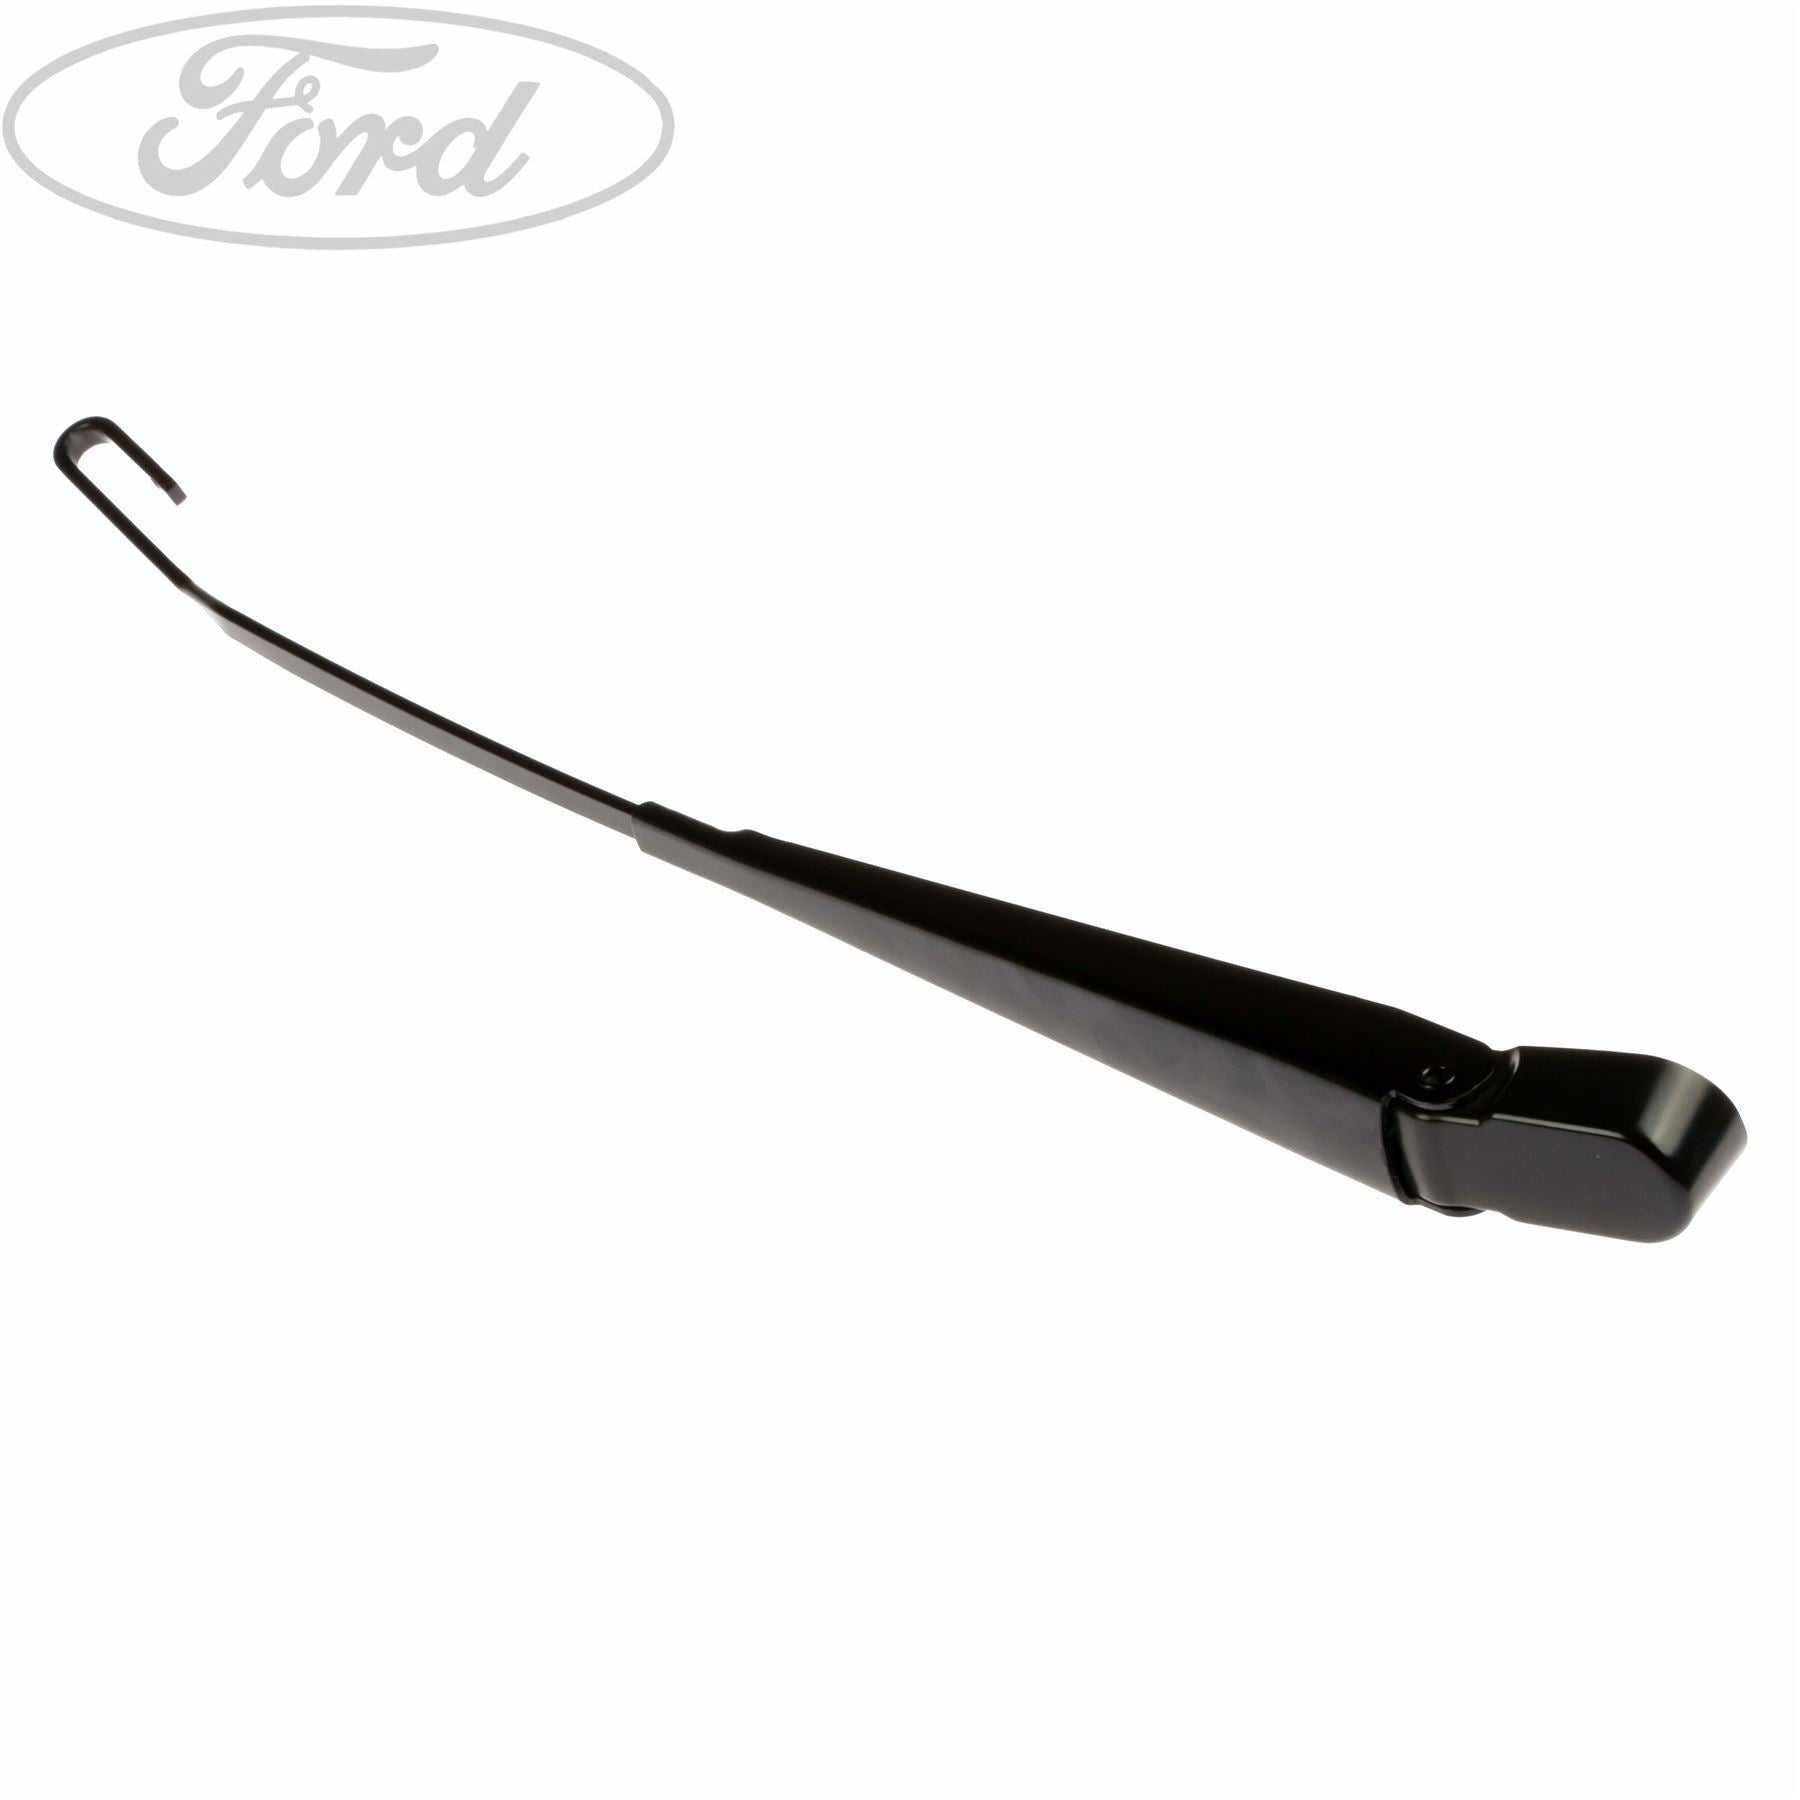 Ford, TRANSIT TRANSIT FRONT O/S WIPER ARM